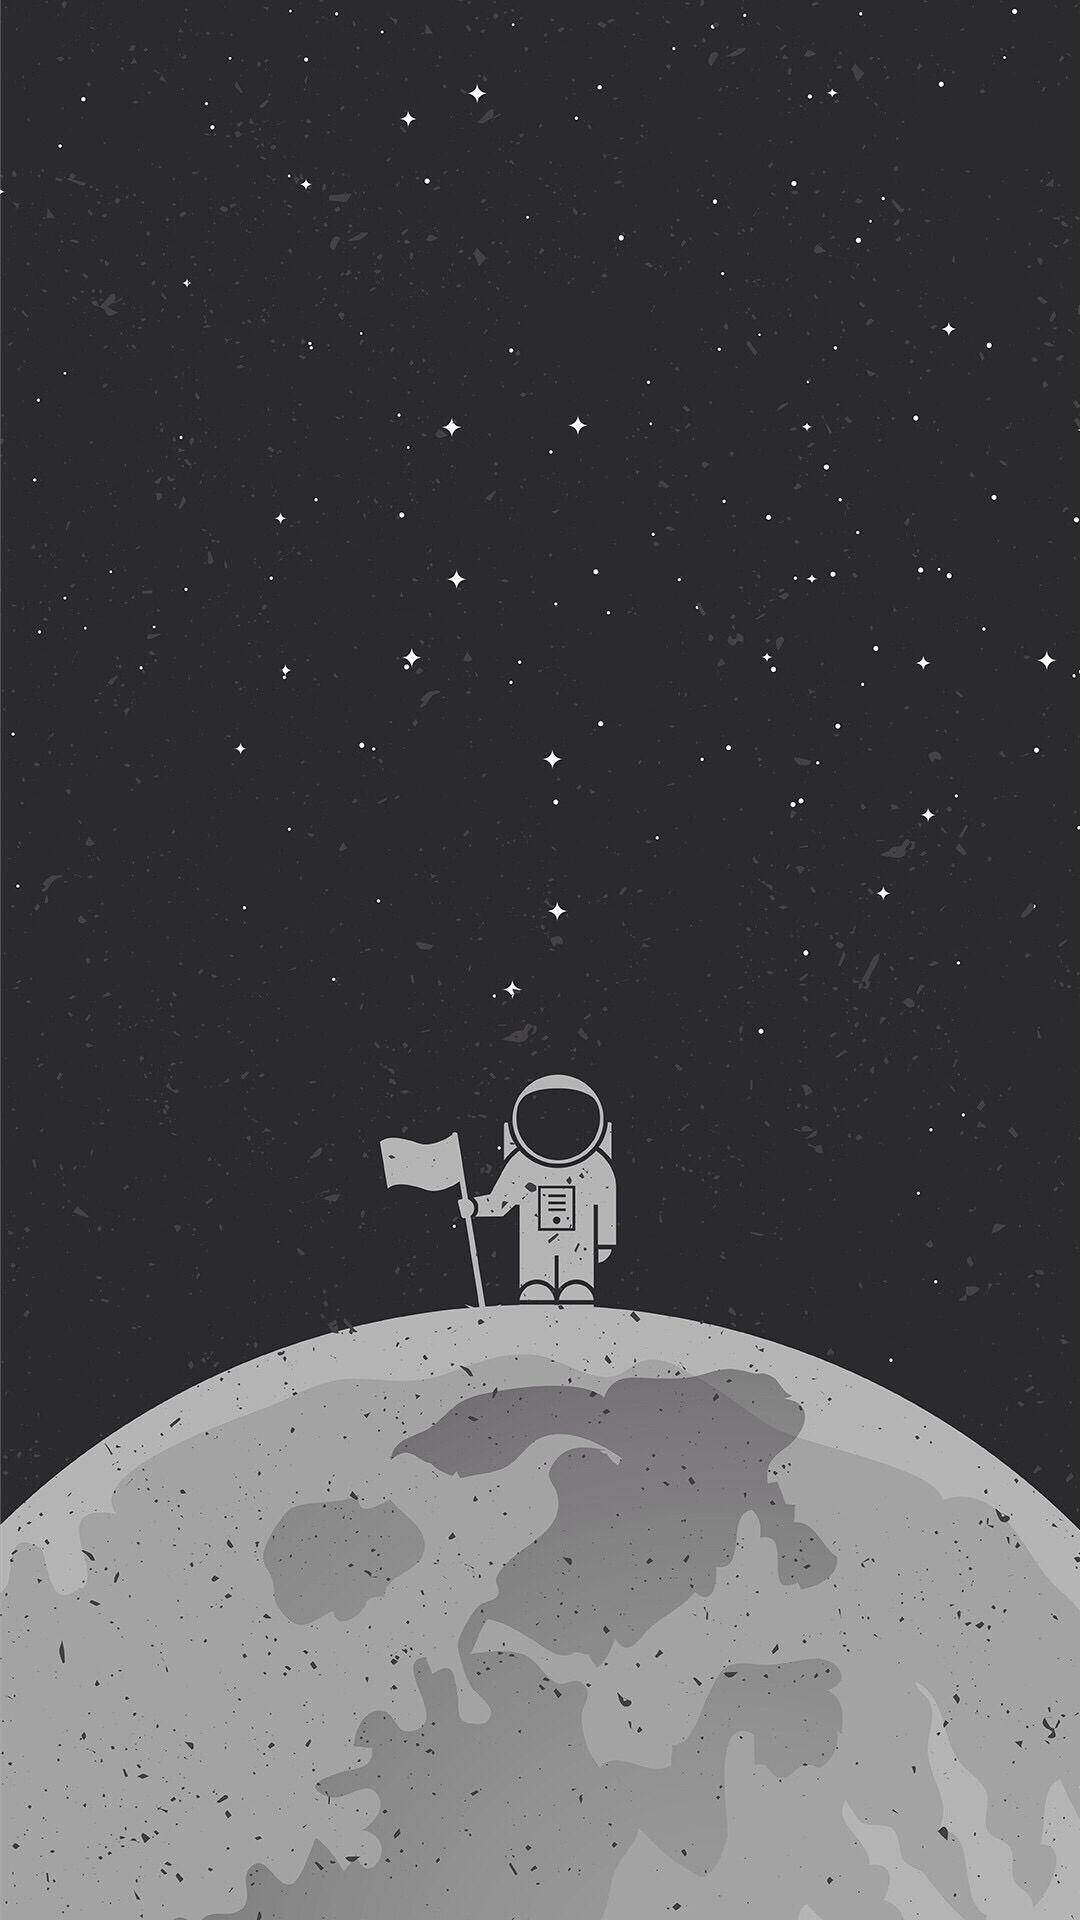 Fantastic Grey Scale Image Of Spaceman